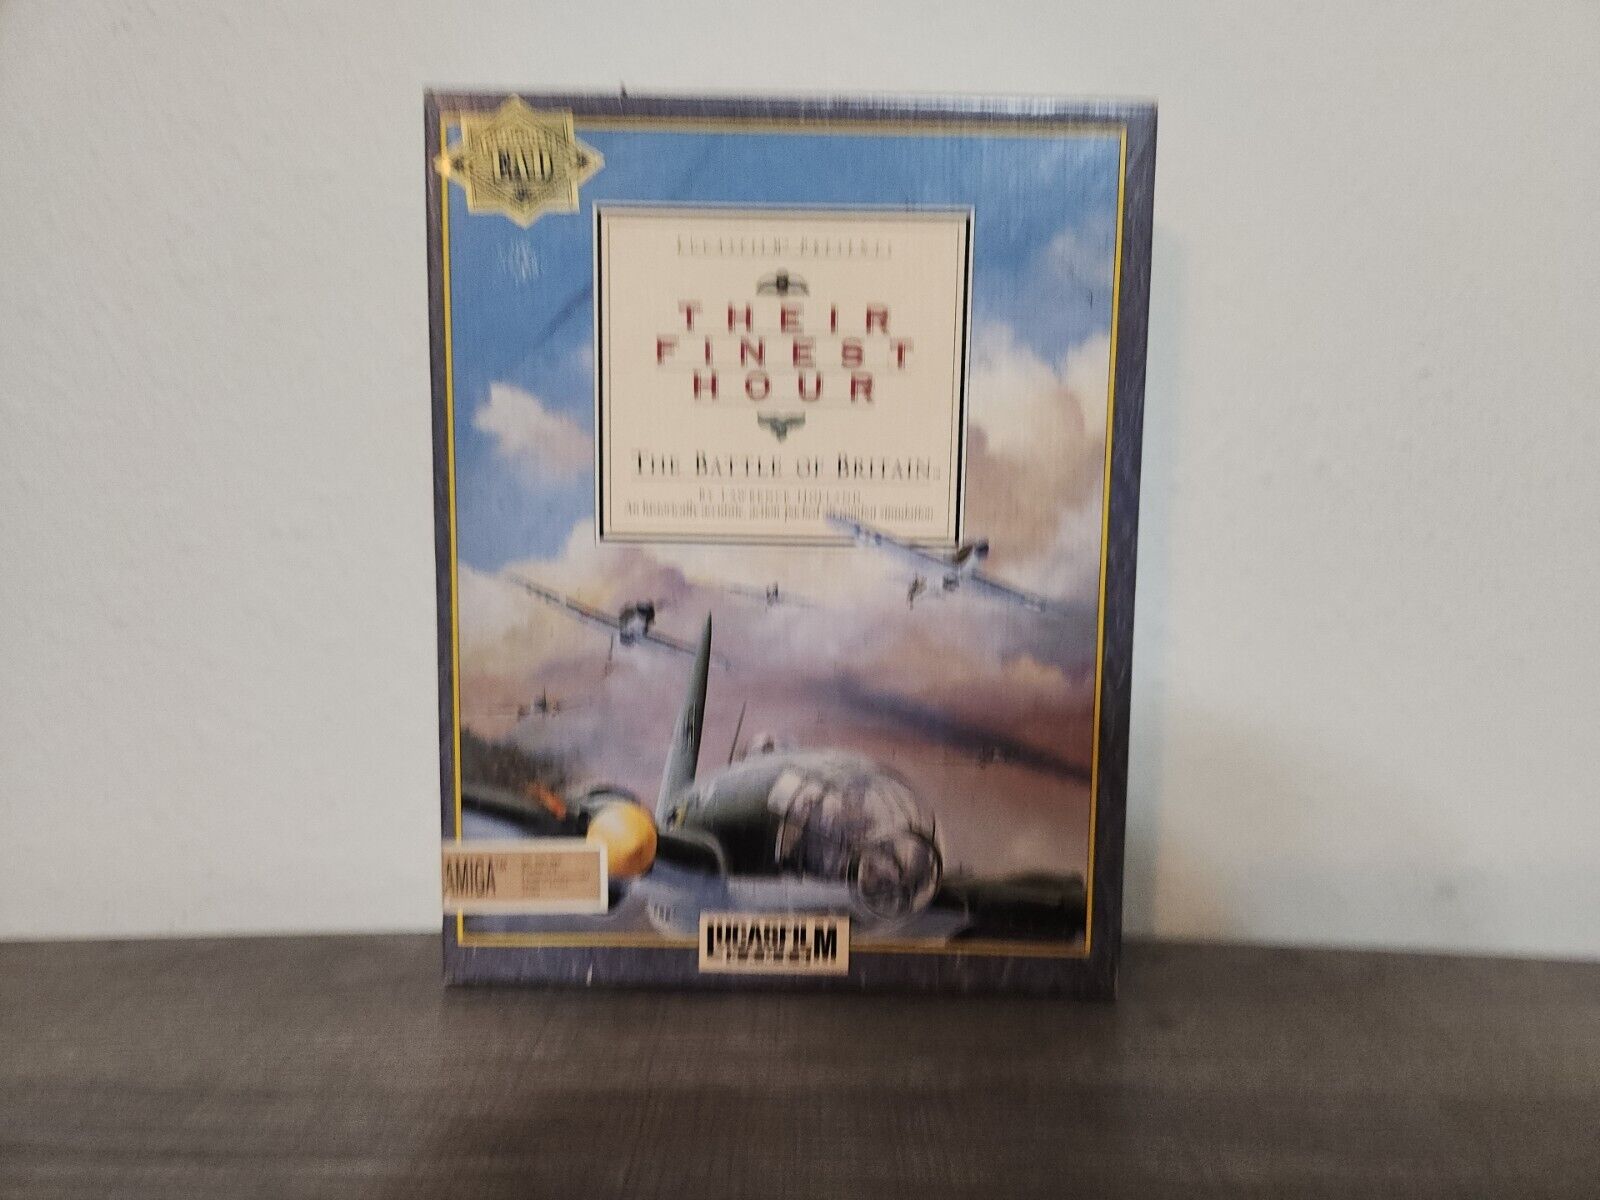 Their Finest Hour - LucasFilm Video Game for PC - 1989 - Box And Manuals Only